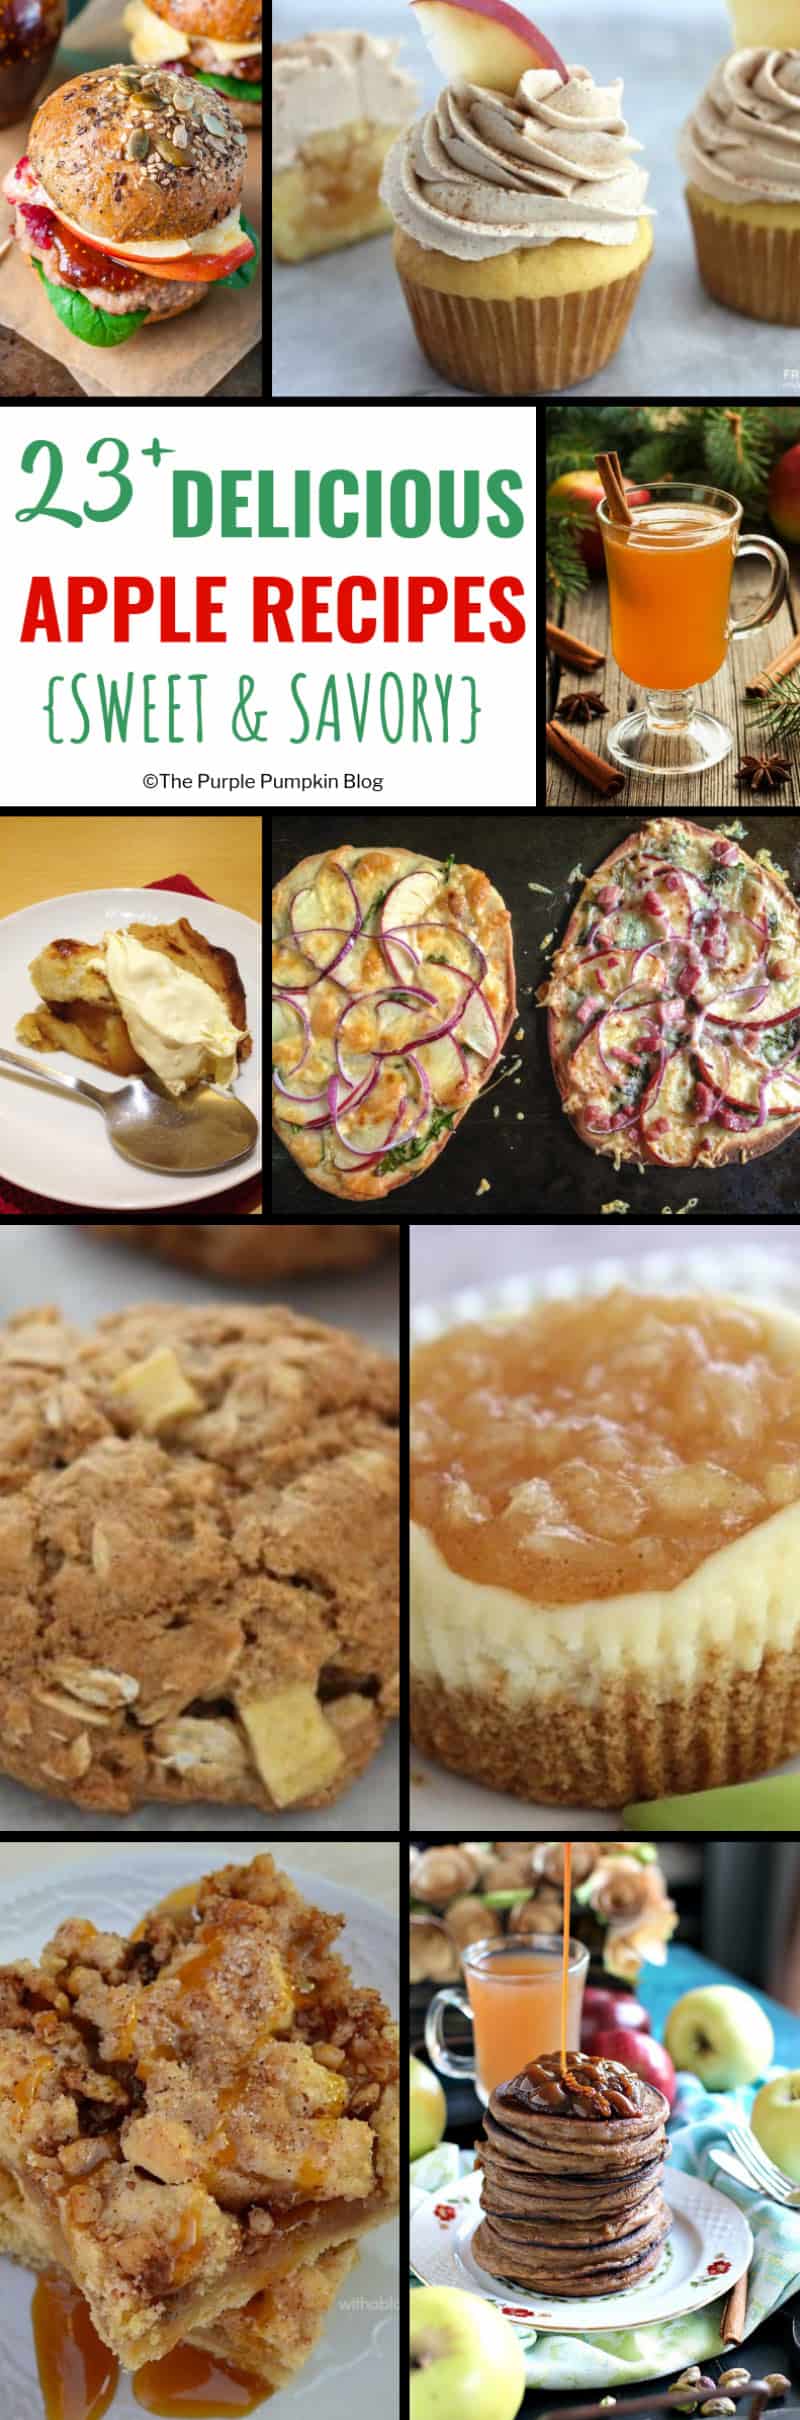 23+ Delicious Apple Recipes {Sweet & Savory} - Thanks to the wide variety of apples available, they make a great ingredient in both both sweet and savory dishes. These apple recipes include burgers, flatbreads, salads, beverages, pies, cupcakes and other sweet treats!